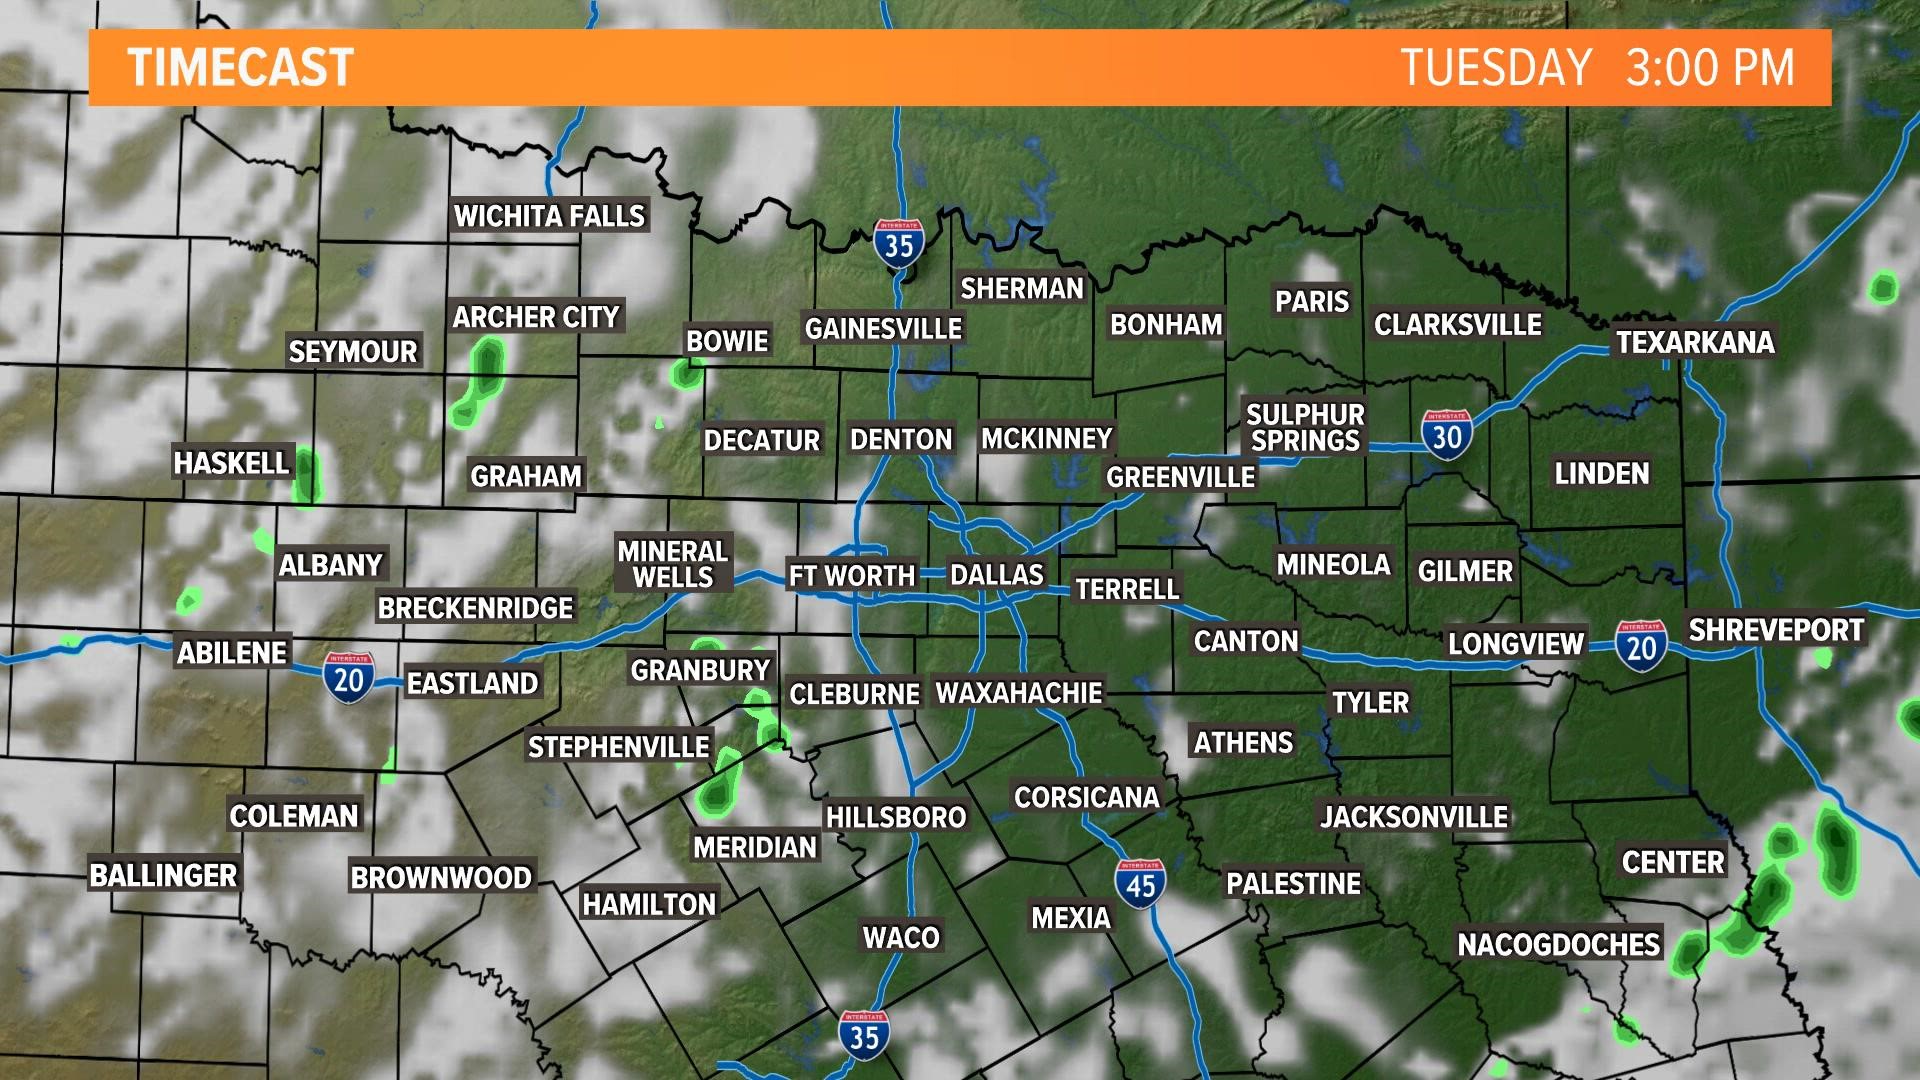 Rain & Storms chances increase going into this evening.